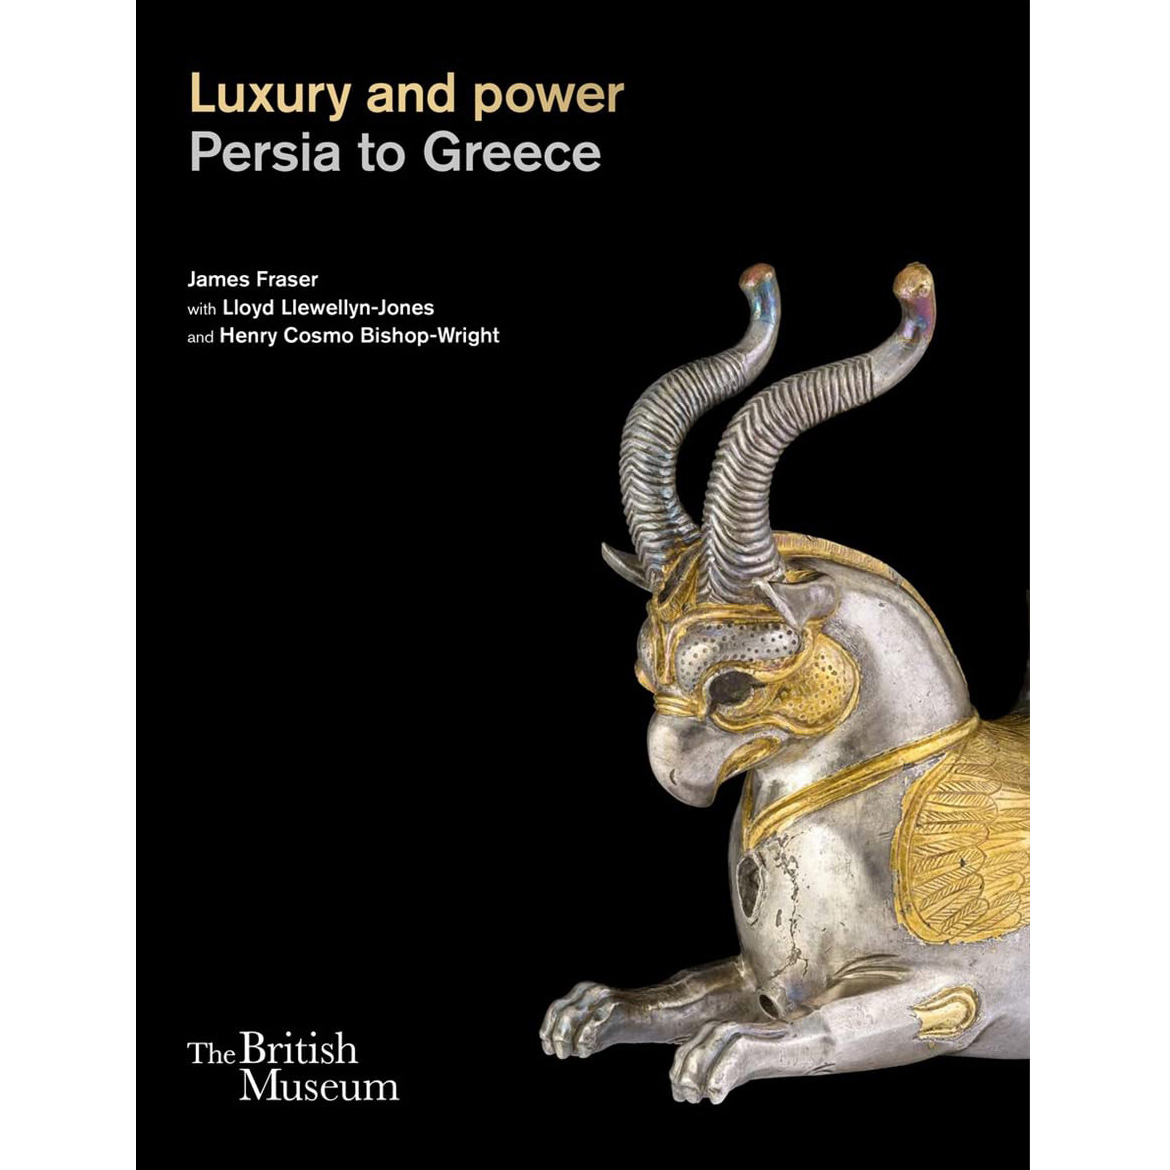 Luxury and power: Persia to Greece